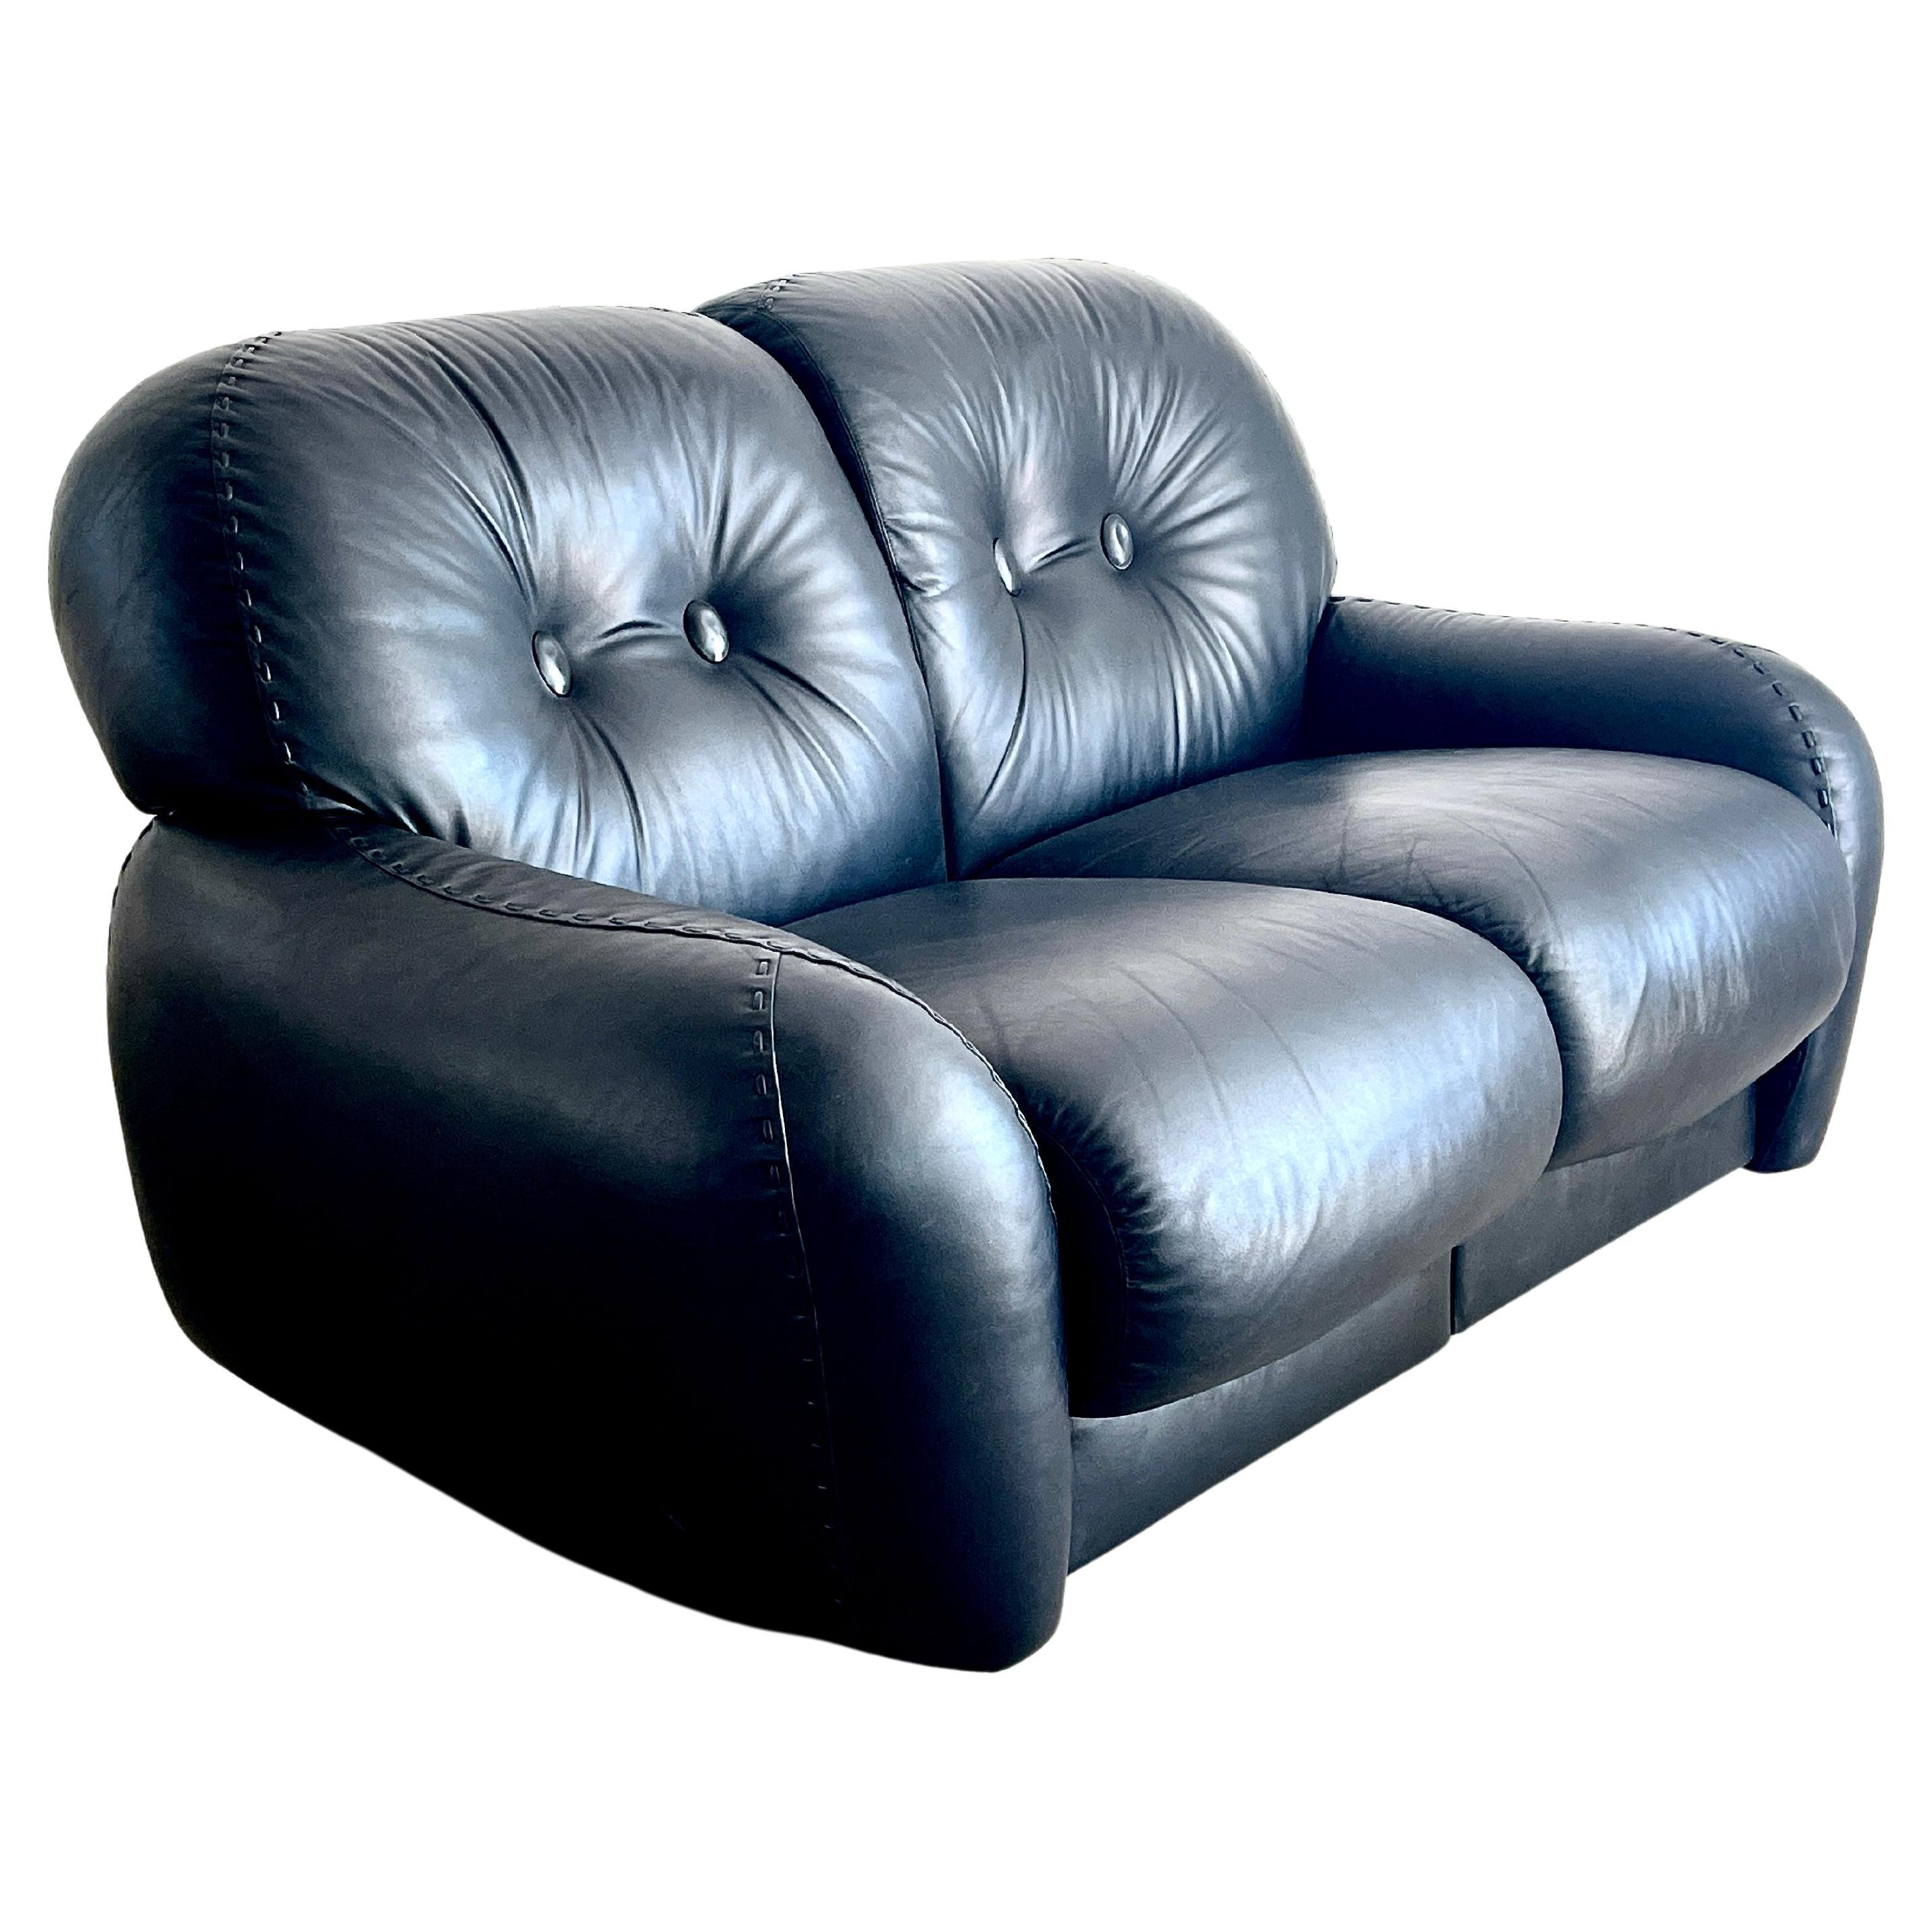 Adriano Piazzesi Loveseat For Sale